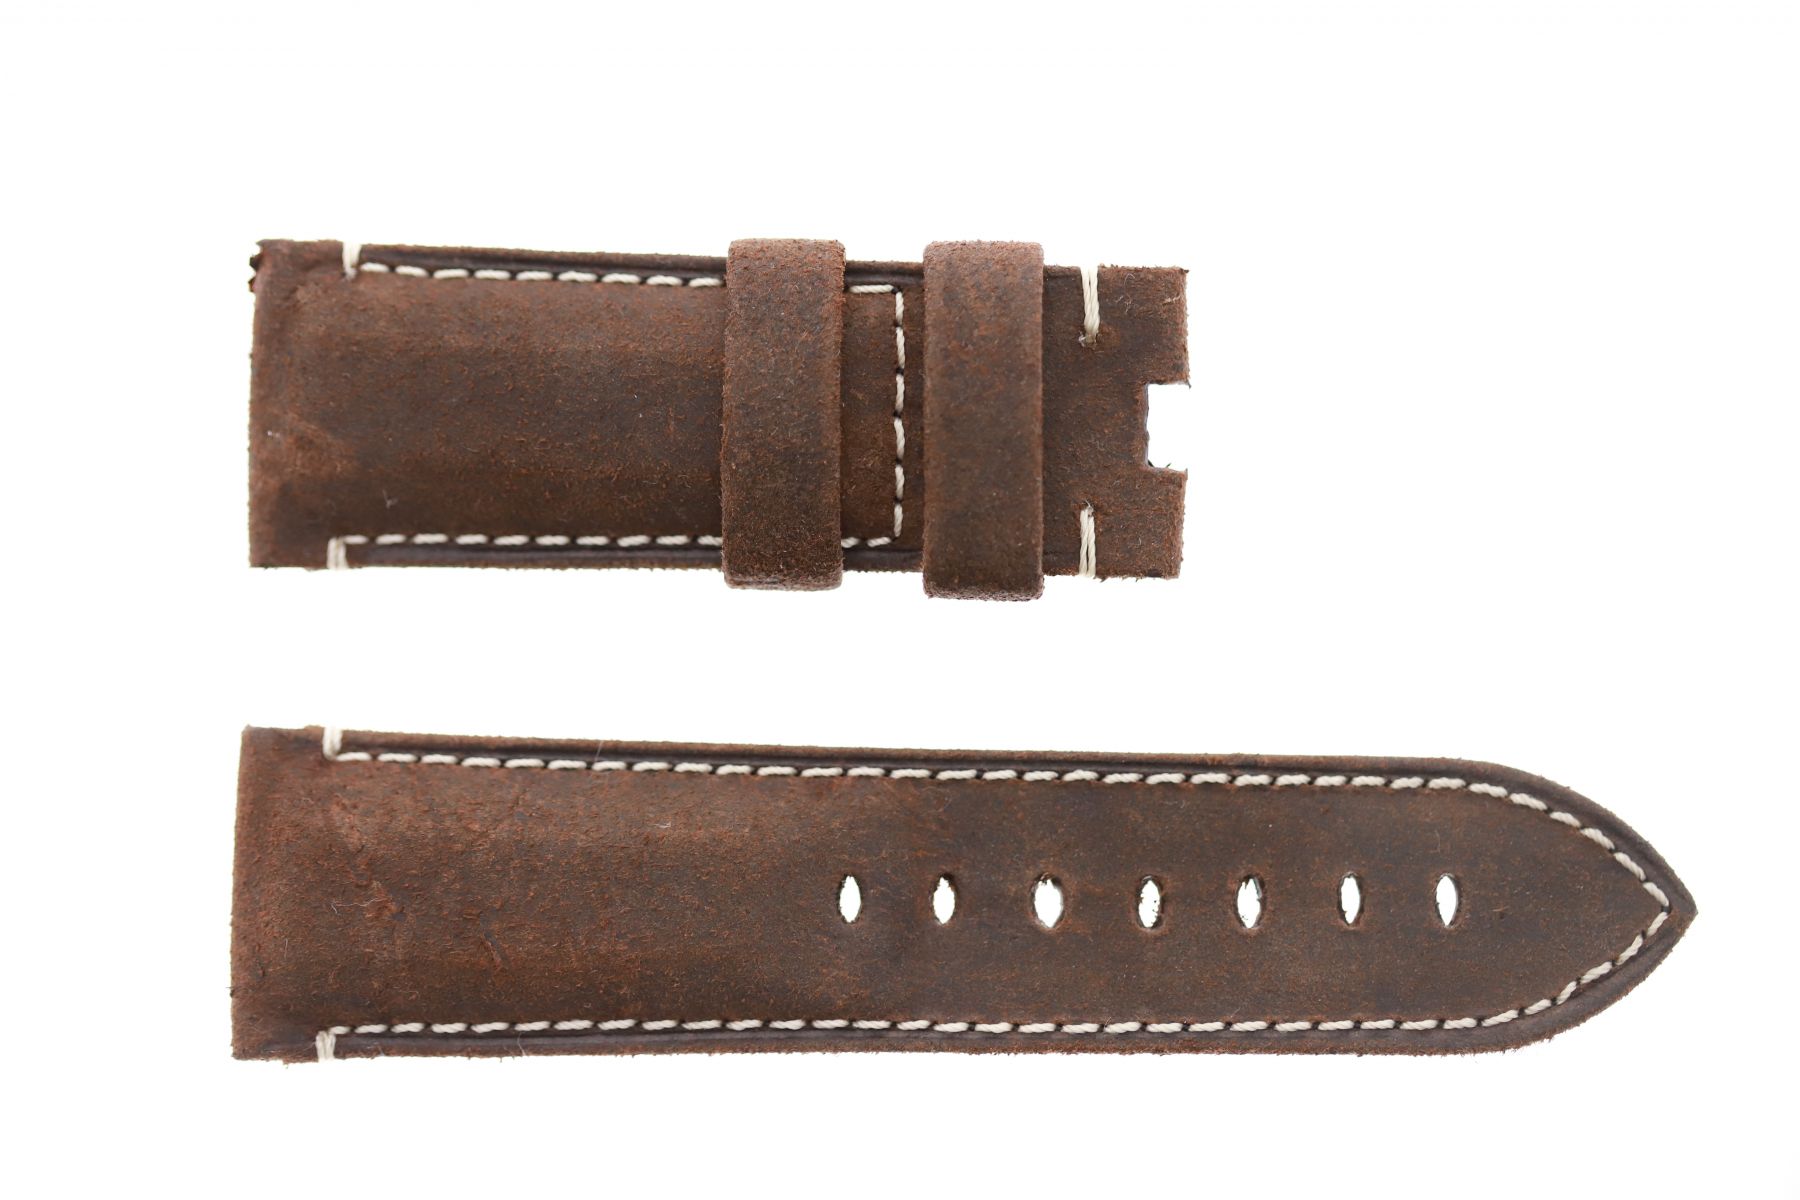 Panerai style strap in Brown Vintage Mohawk leather. Folded edges